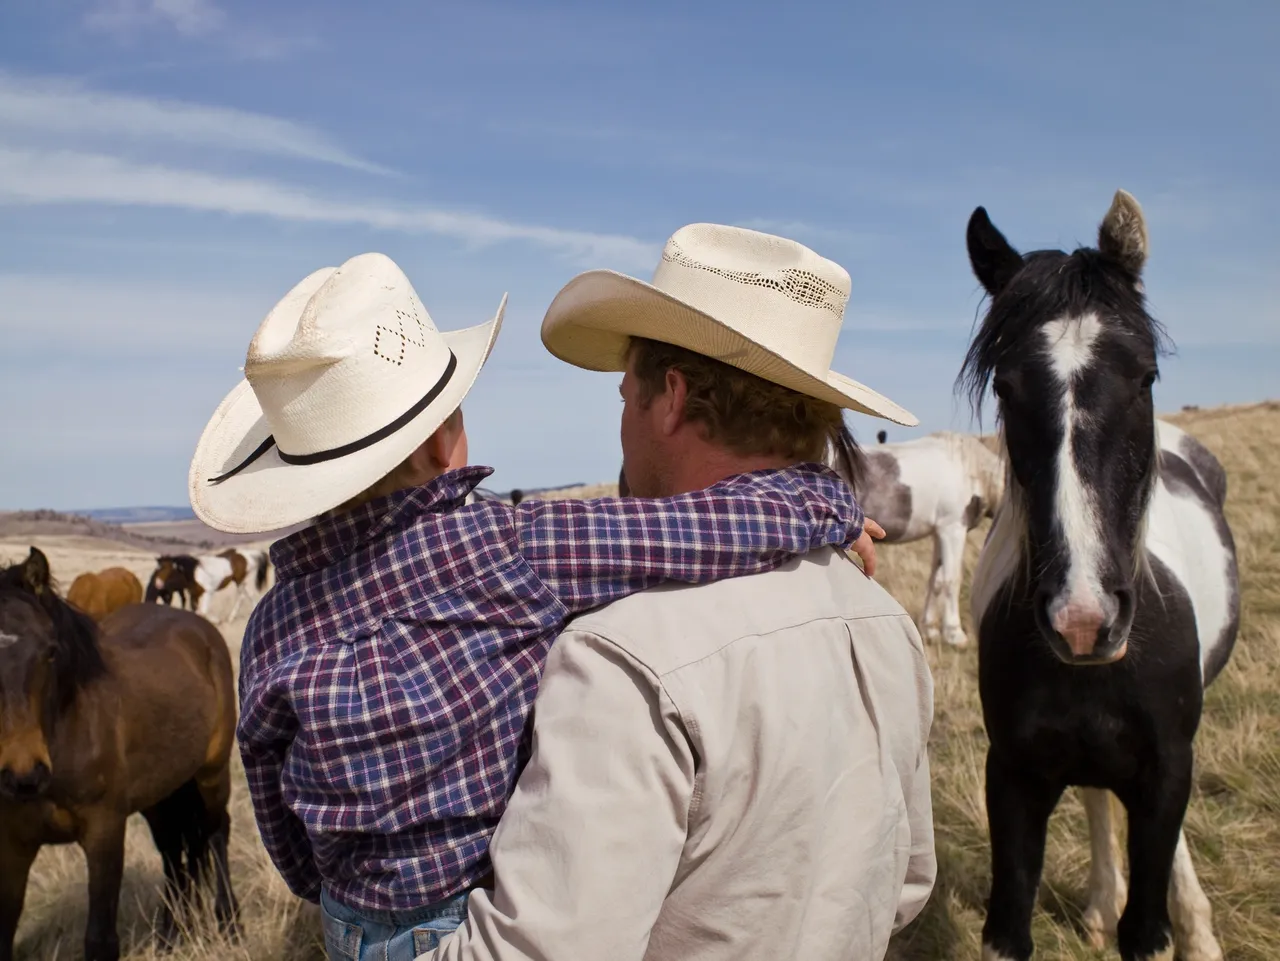 Son has his arm around father's neck, both in cowboy hats looking out at horses